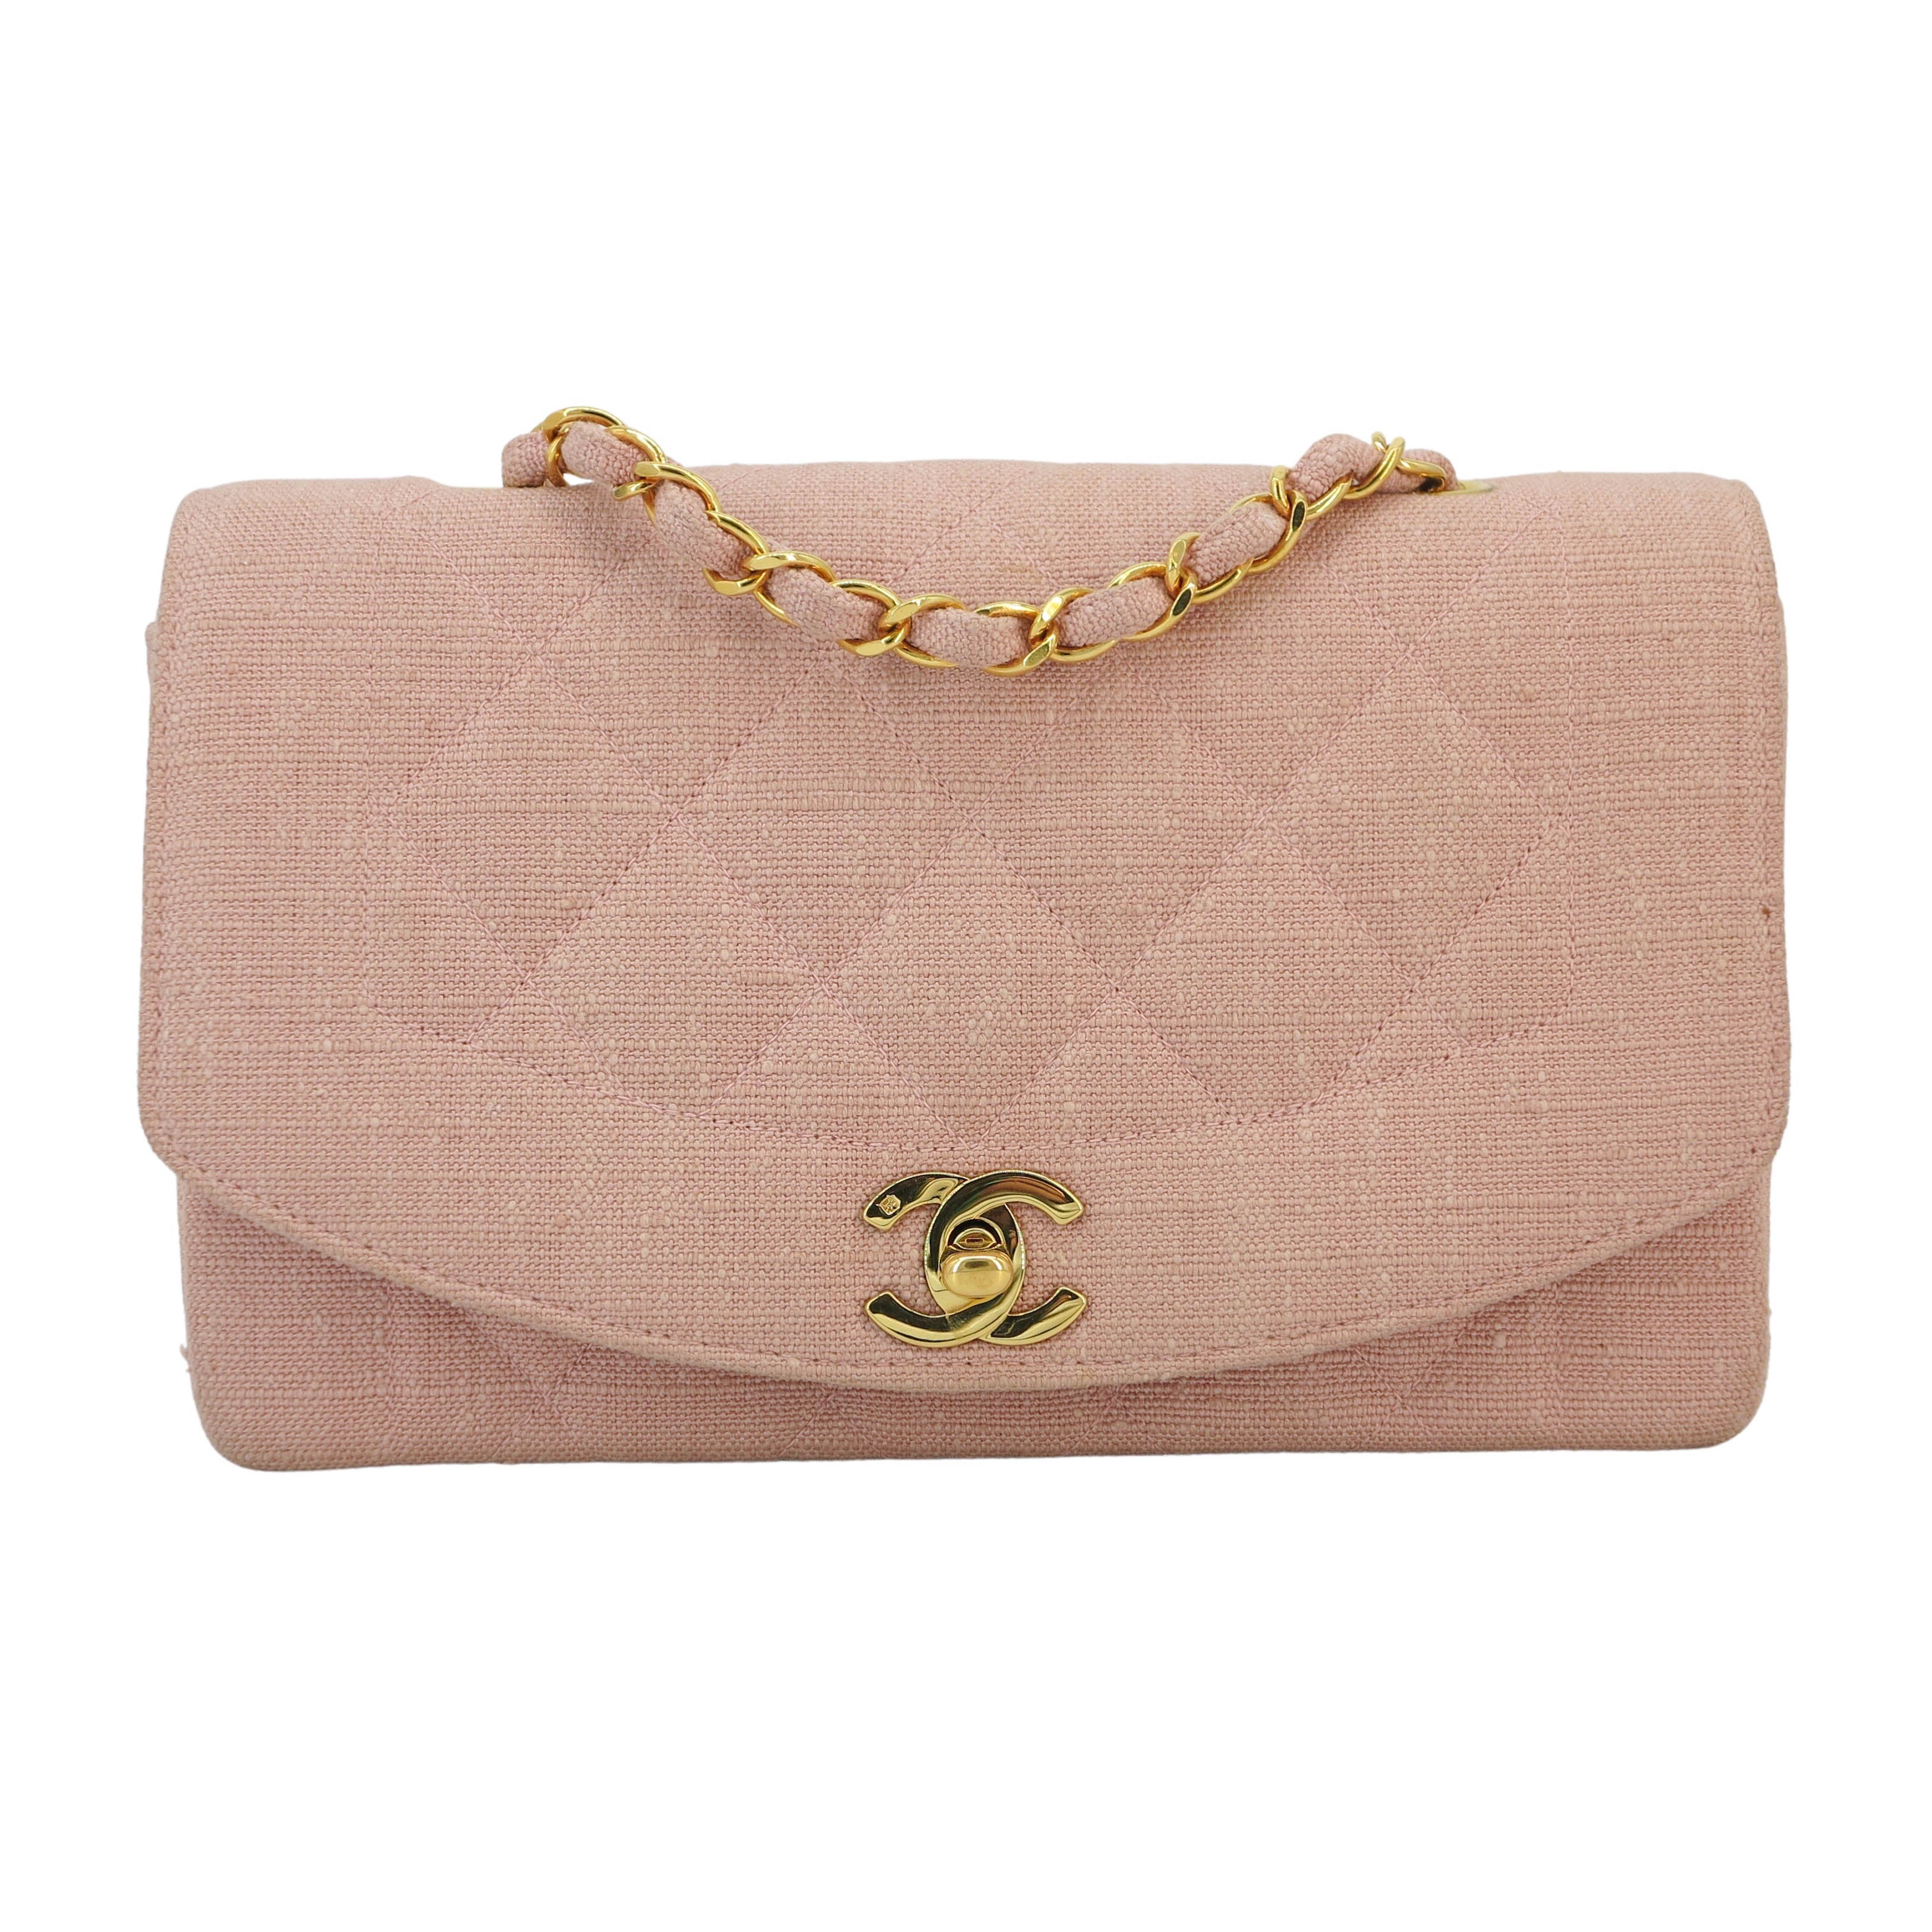 Vintage Small Diana Flap Bag in Pink Linen